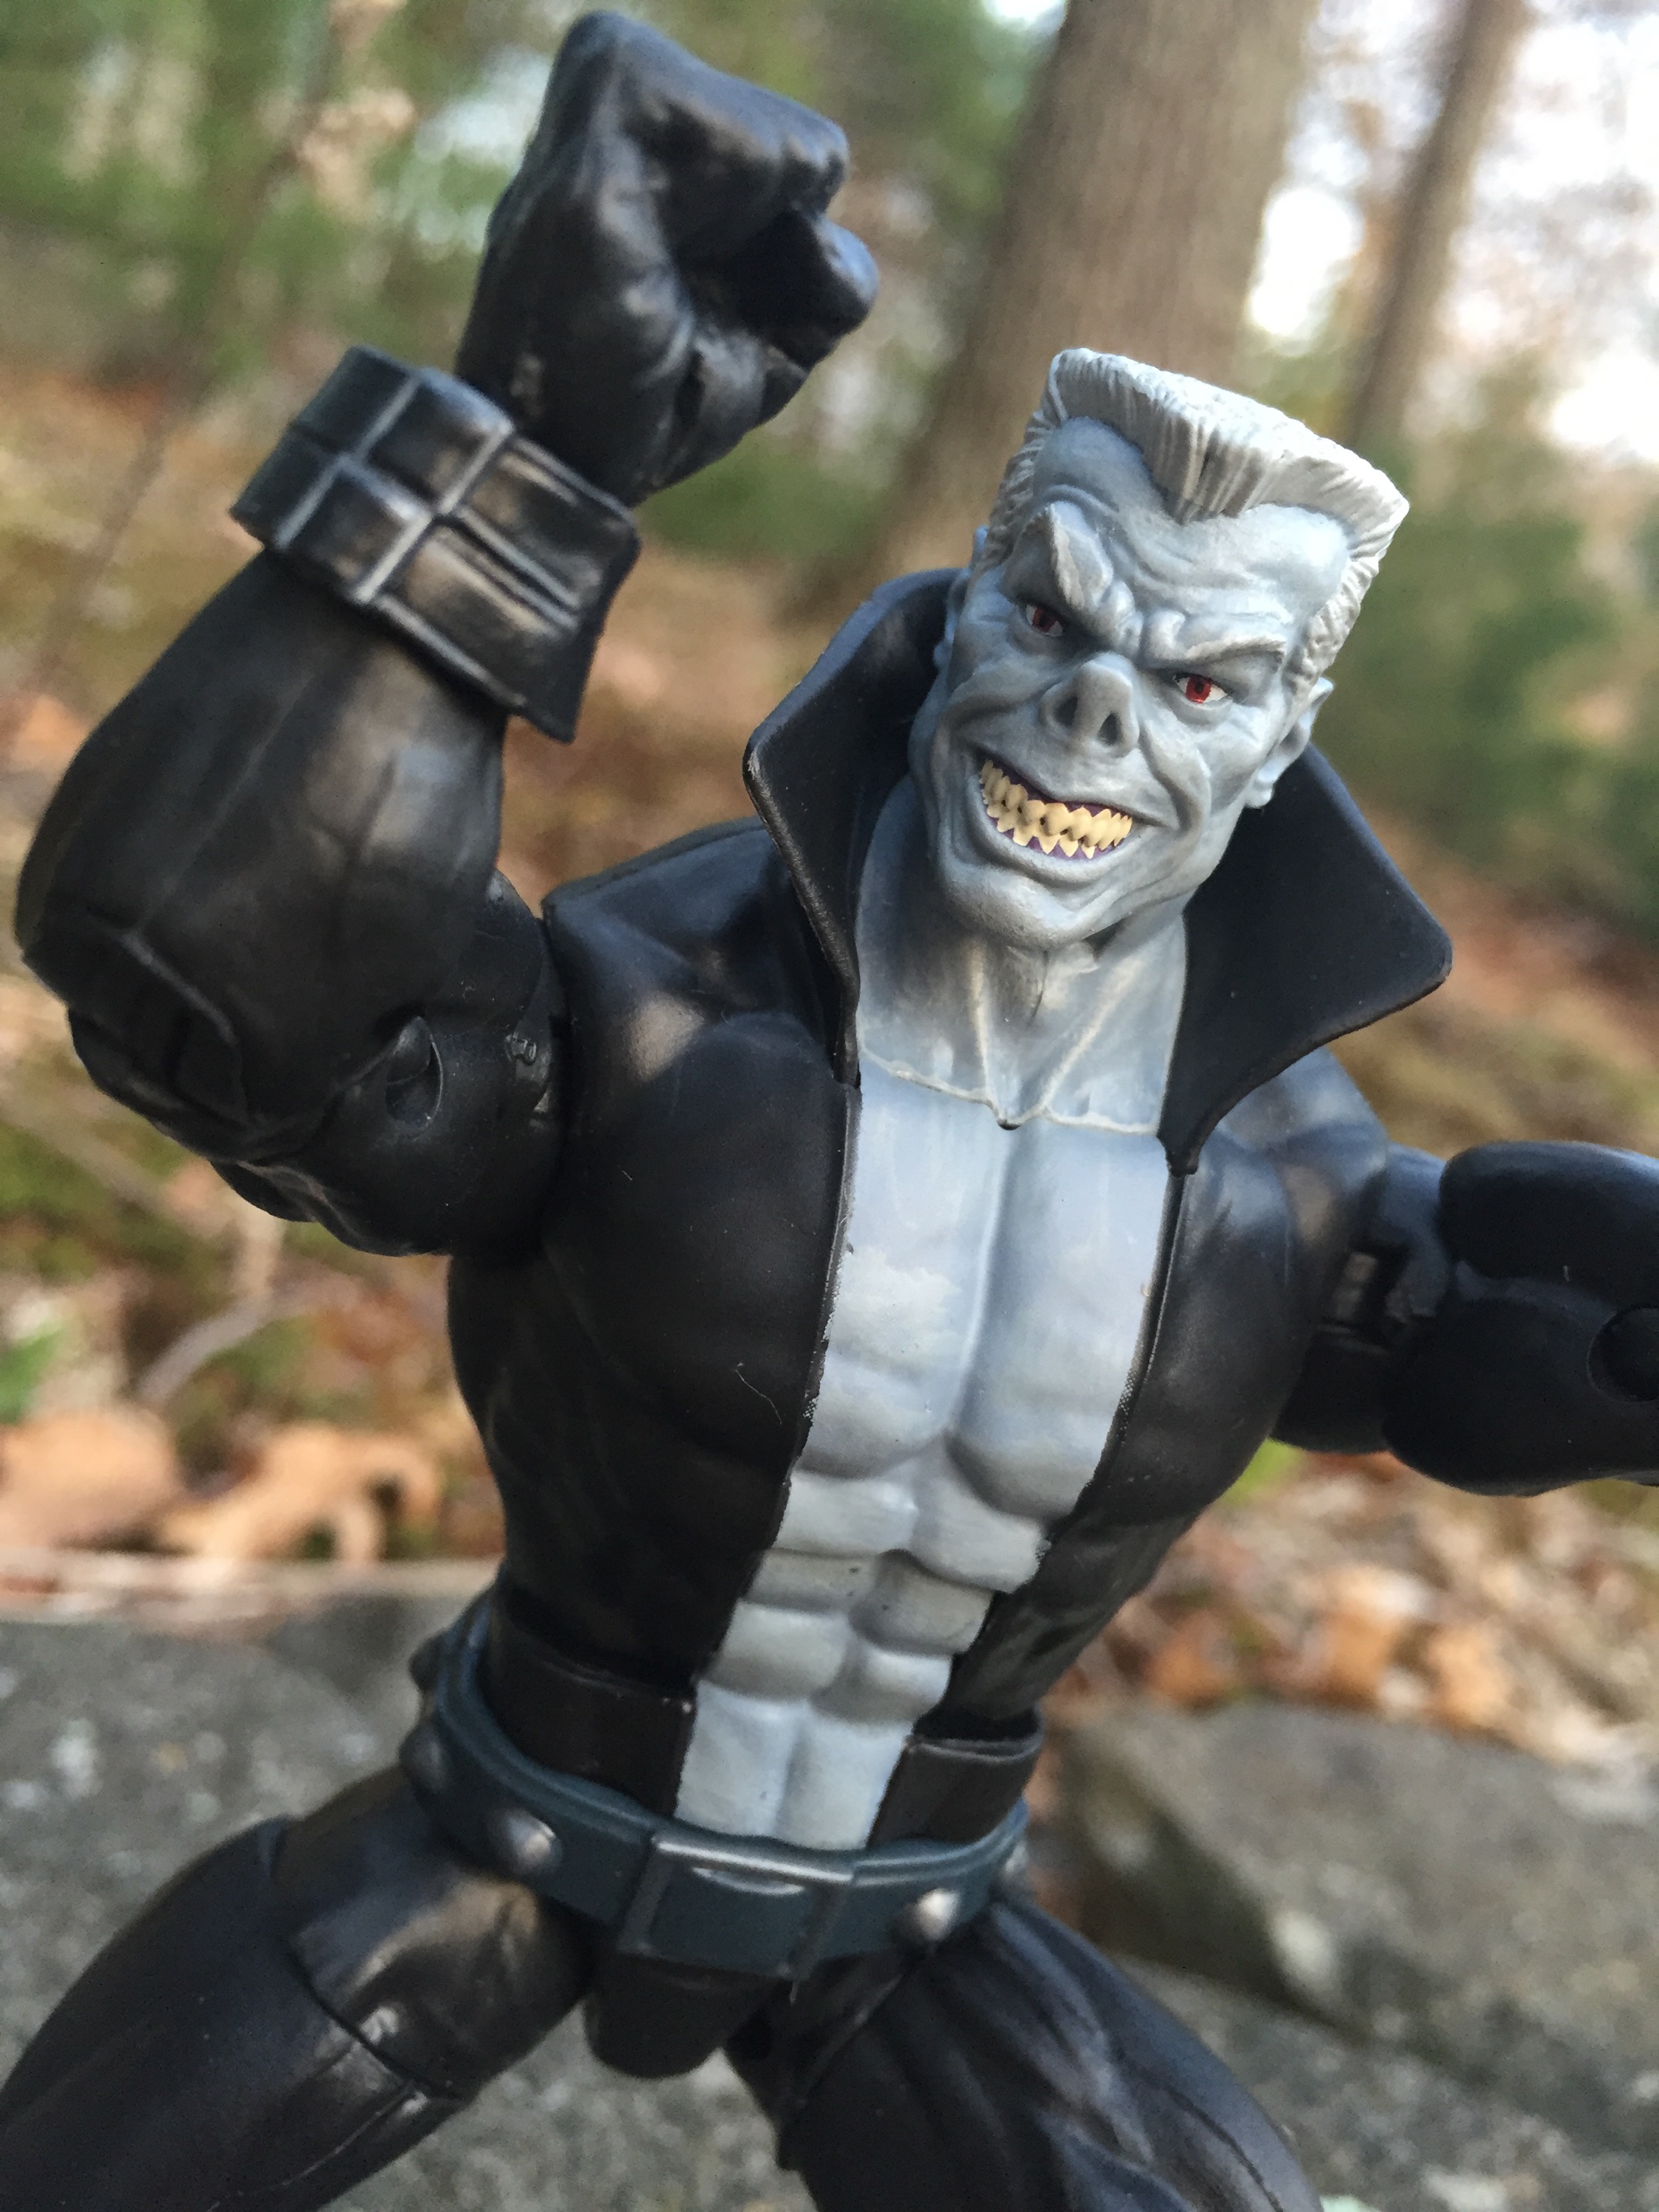 SpiderMan Marvel Legends Tombstone Review